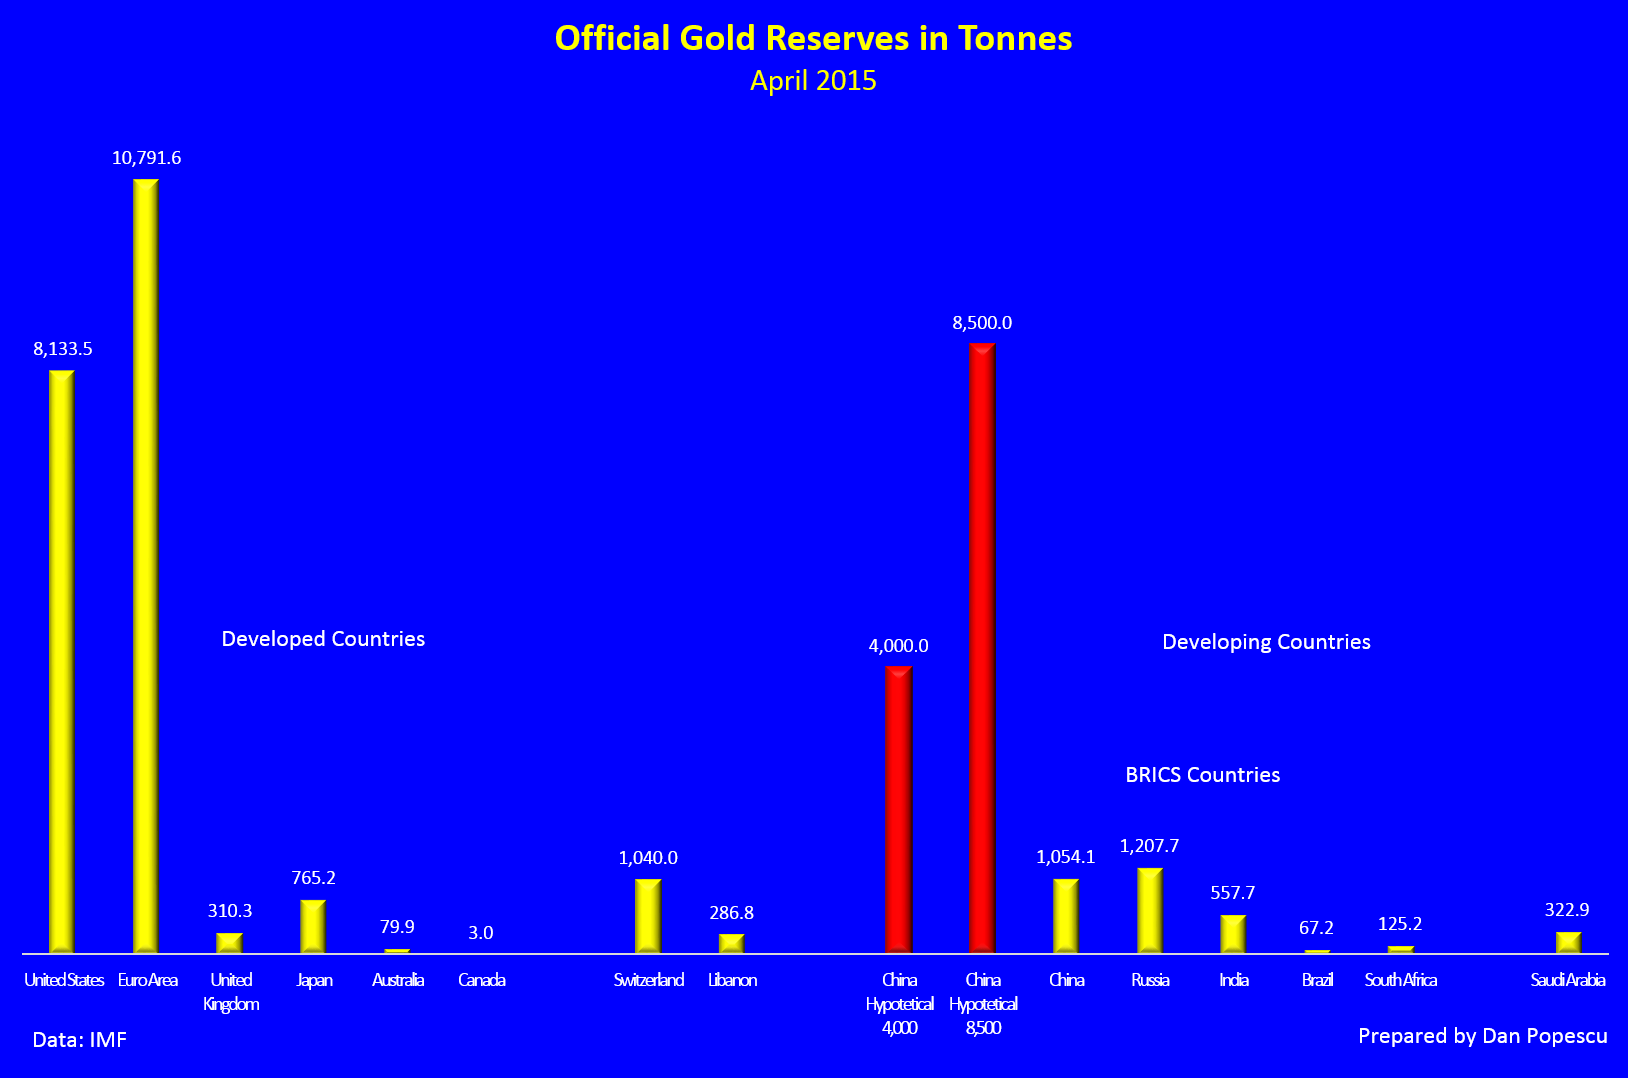 Official Gold Reserves in Tonnes